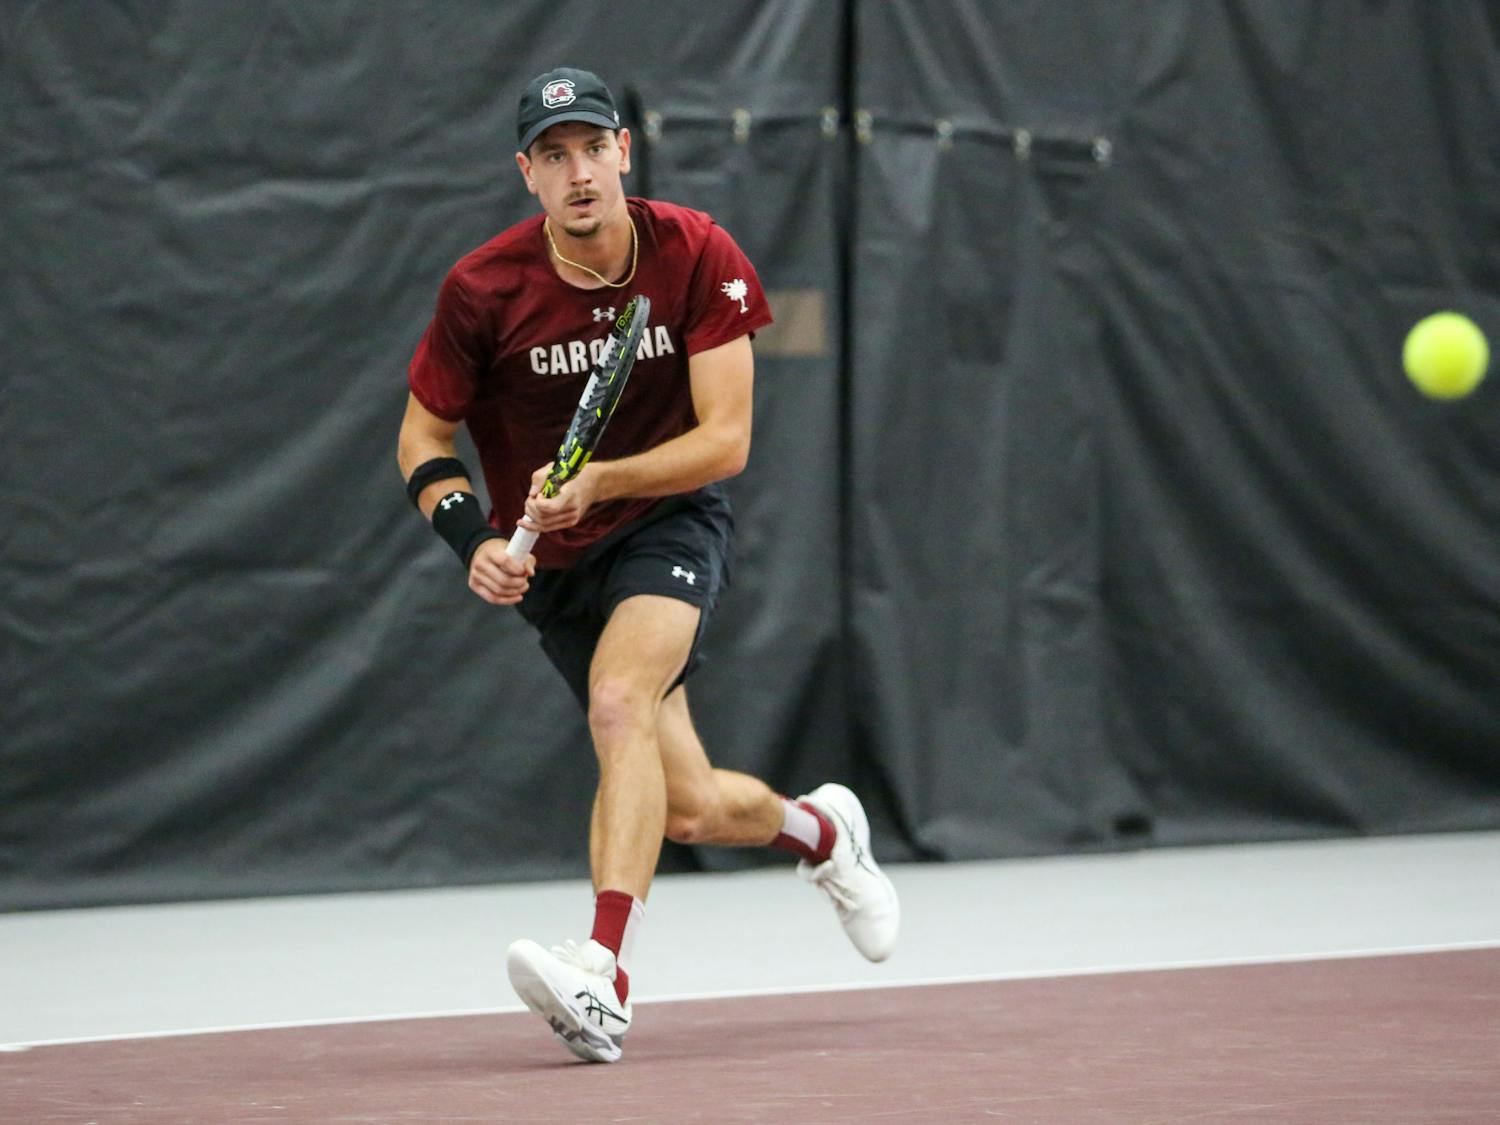 Graduate student Raphael Lambling eyes the ball for a return during South Carolina’s match against Georgia at the Carolina Indoor Tennis Center on April 7, 2023. The Gamecocks lost to the Bulldogs 4-0.